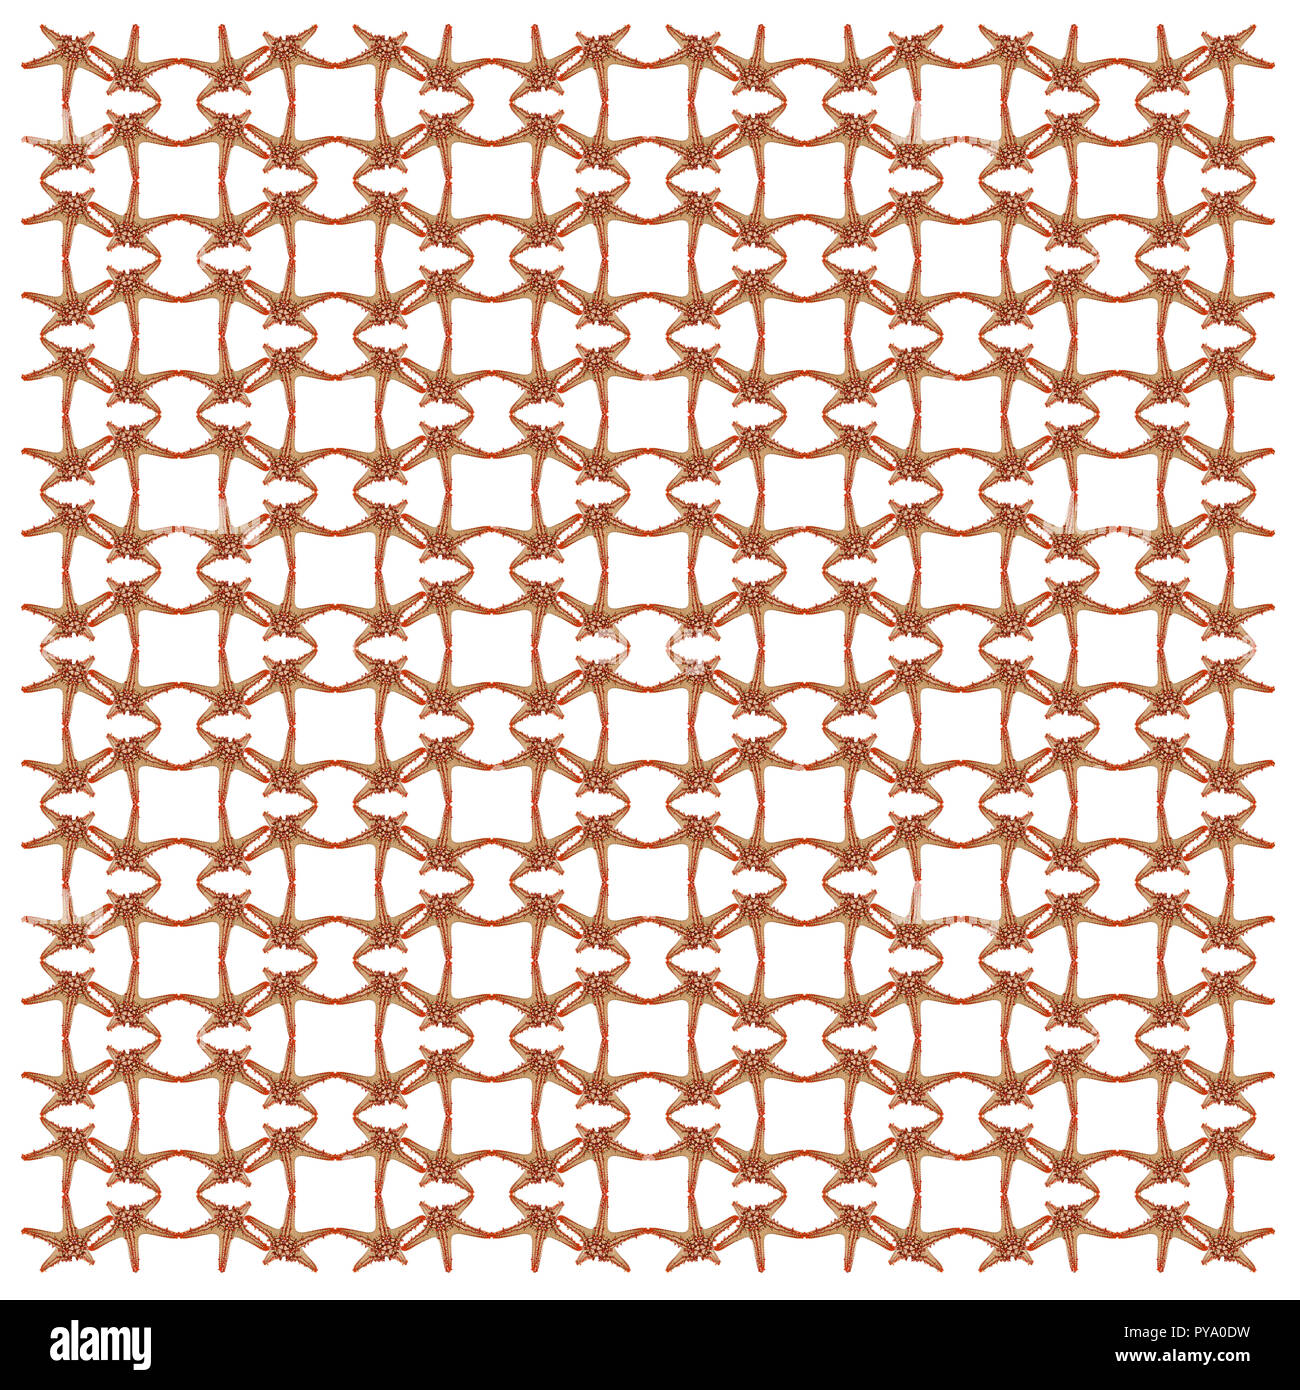 Red-knobbed starfish, Protoreaster linckii, in repeated pattern, in front of white background Stock Photo